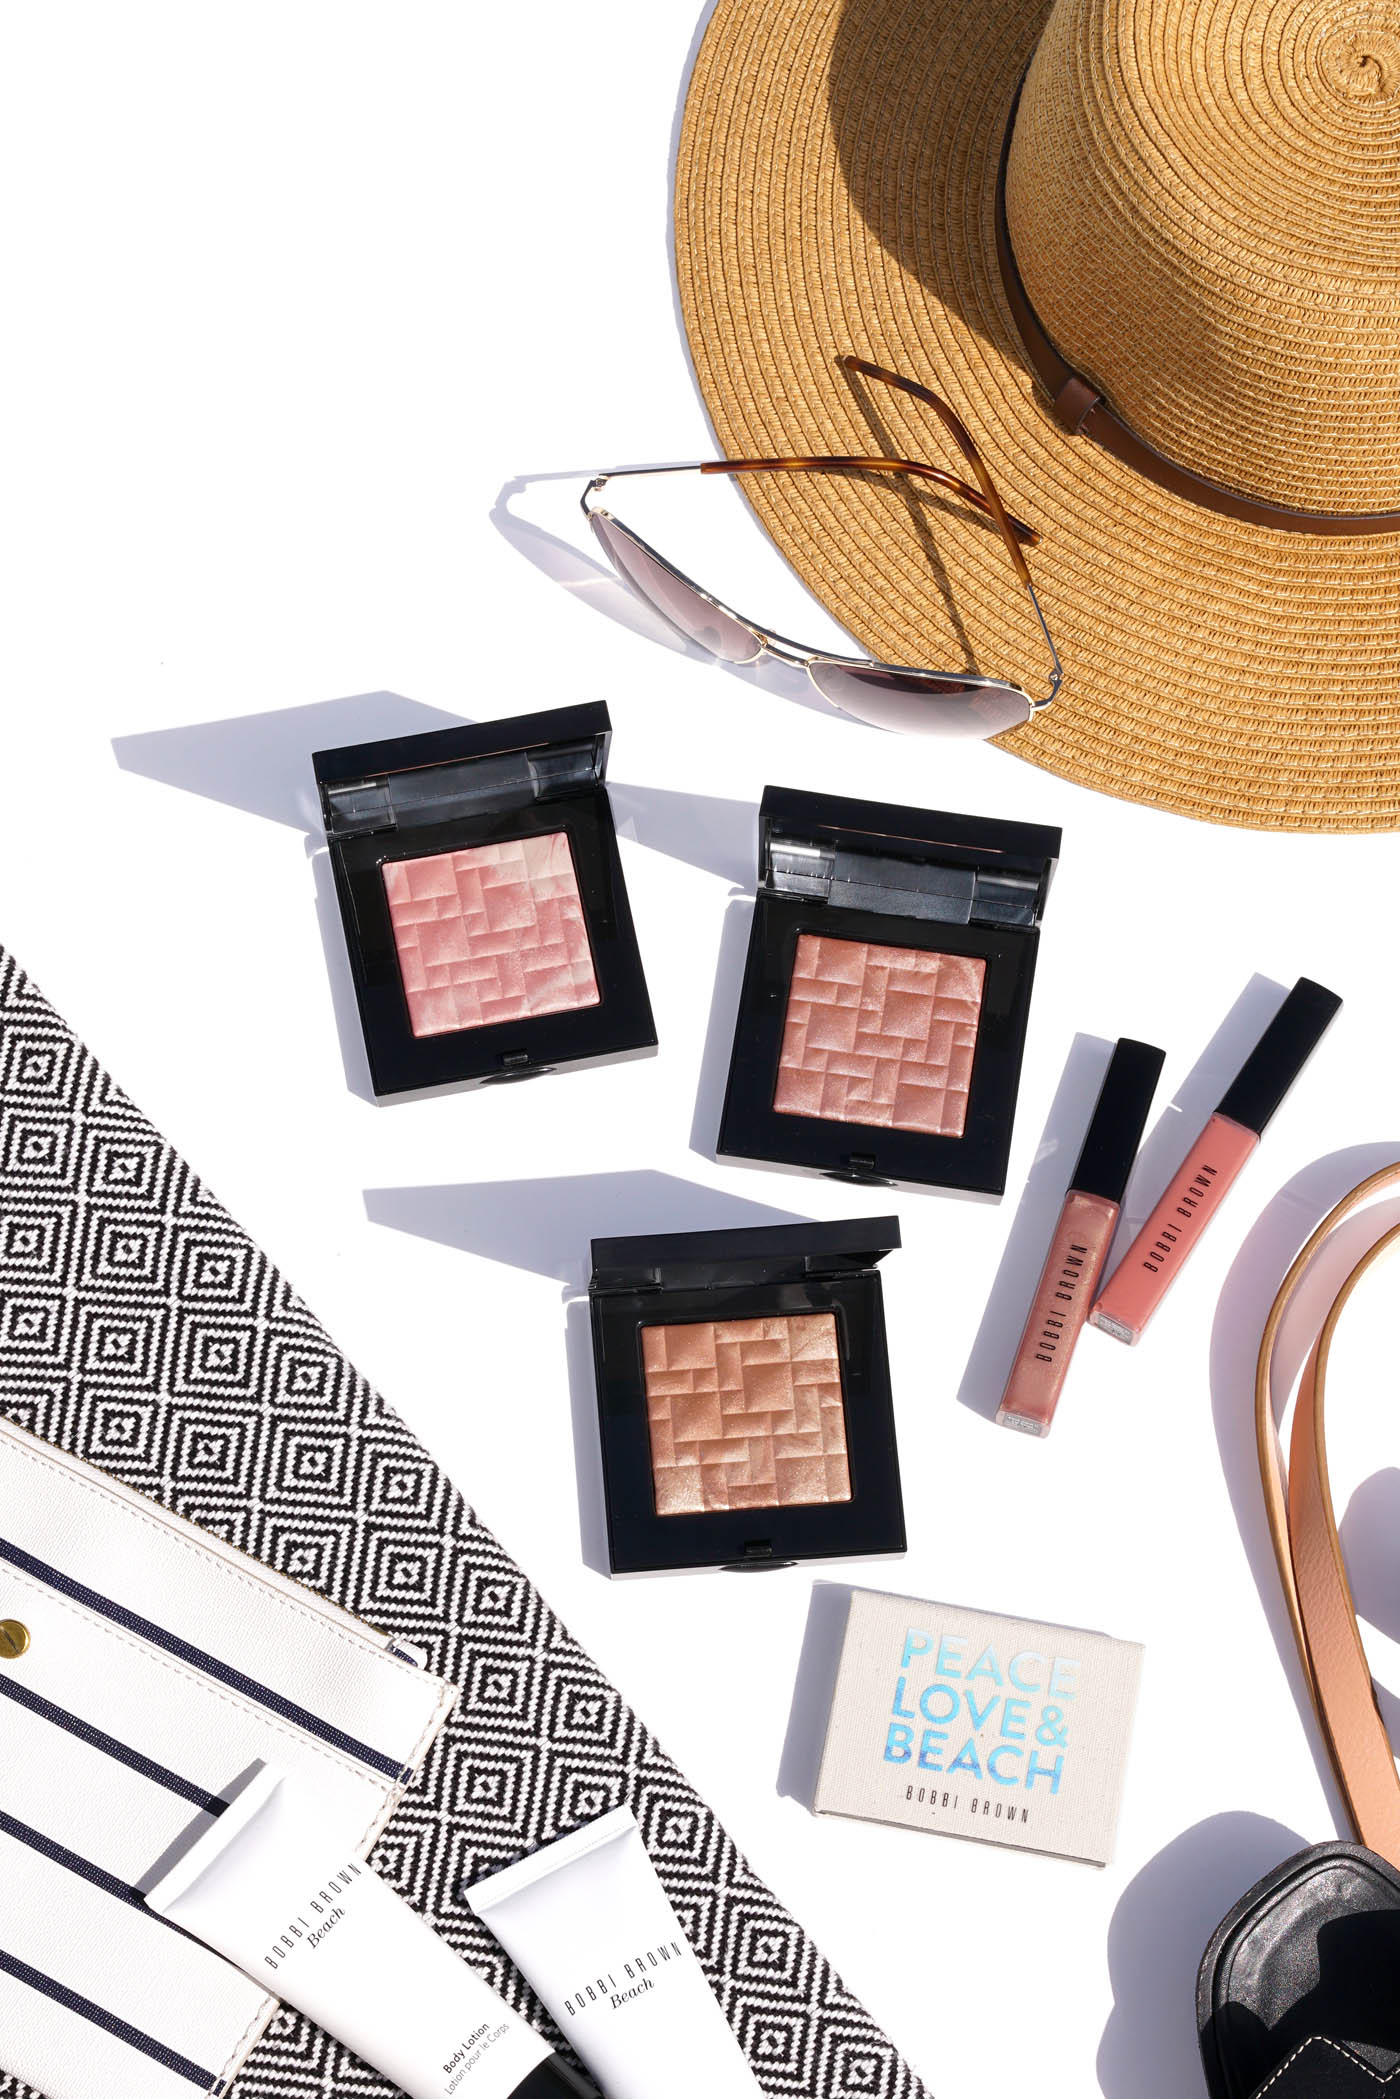 Bobbi Brown Peace, Love and Beach Collection Highlighting Powder and Love Eye Shadow Trio | The Beauty Look Book